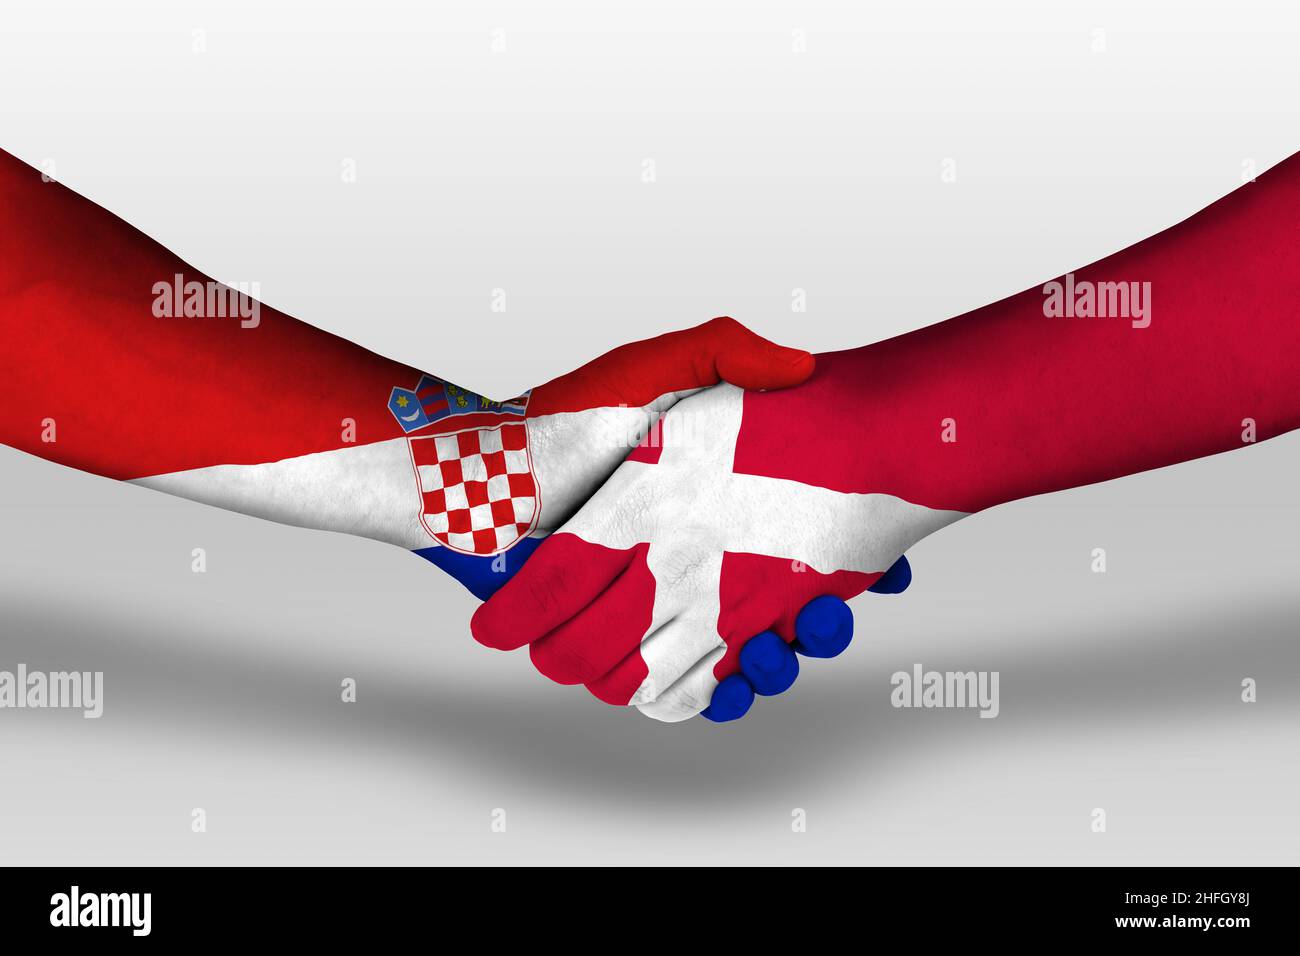 Handshake between cuba and croatia flags painted on hands, illustration with clipping path. Stock Photo